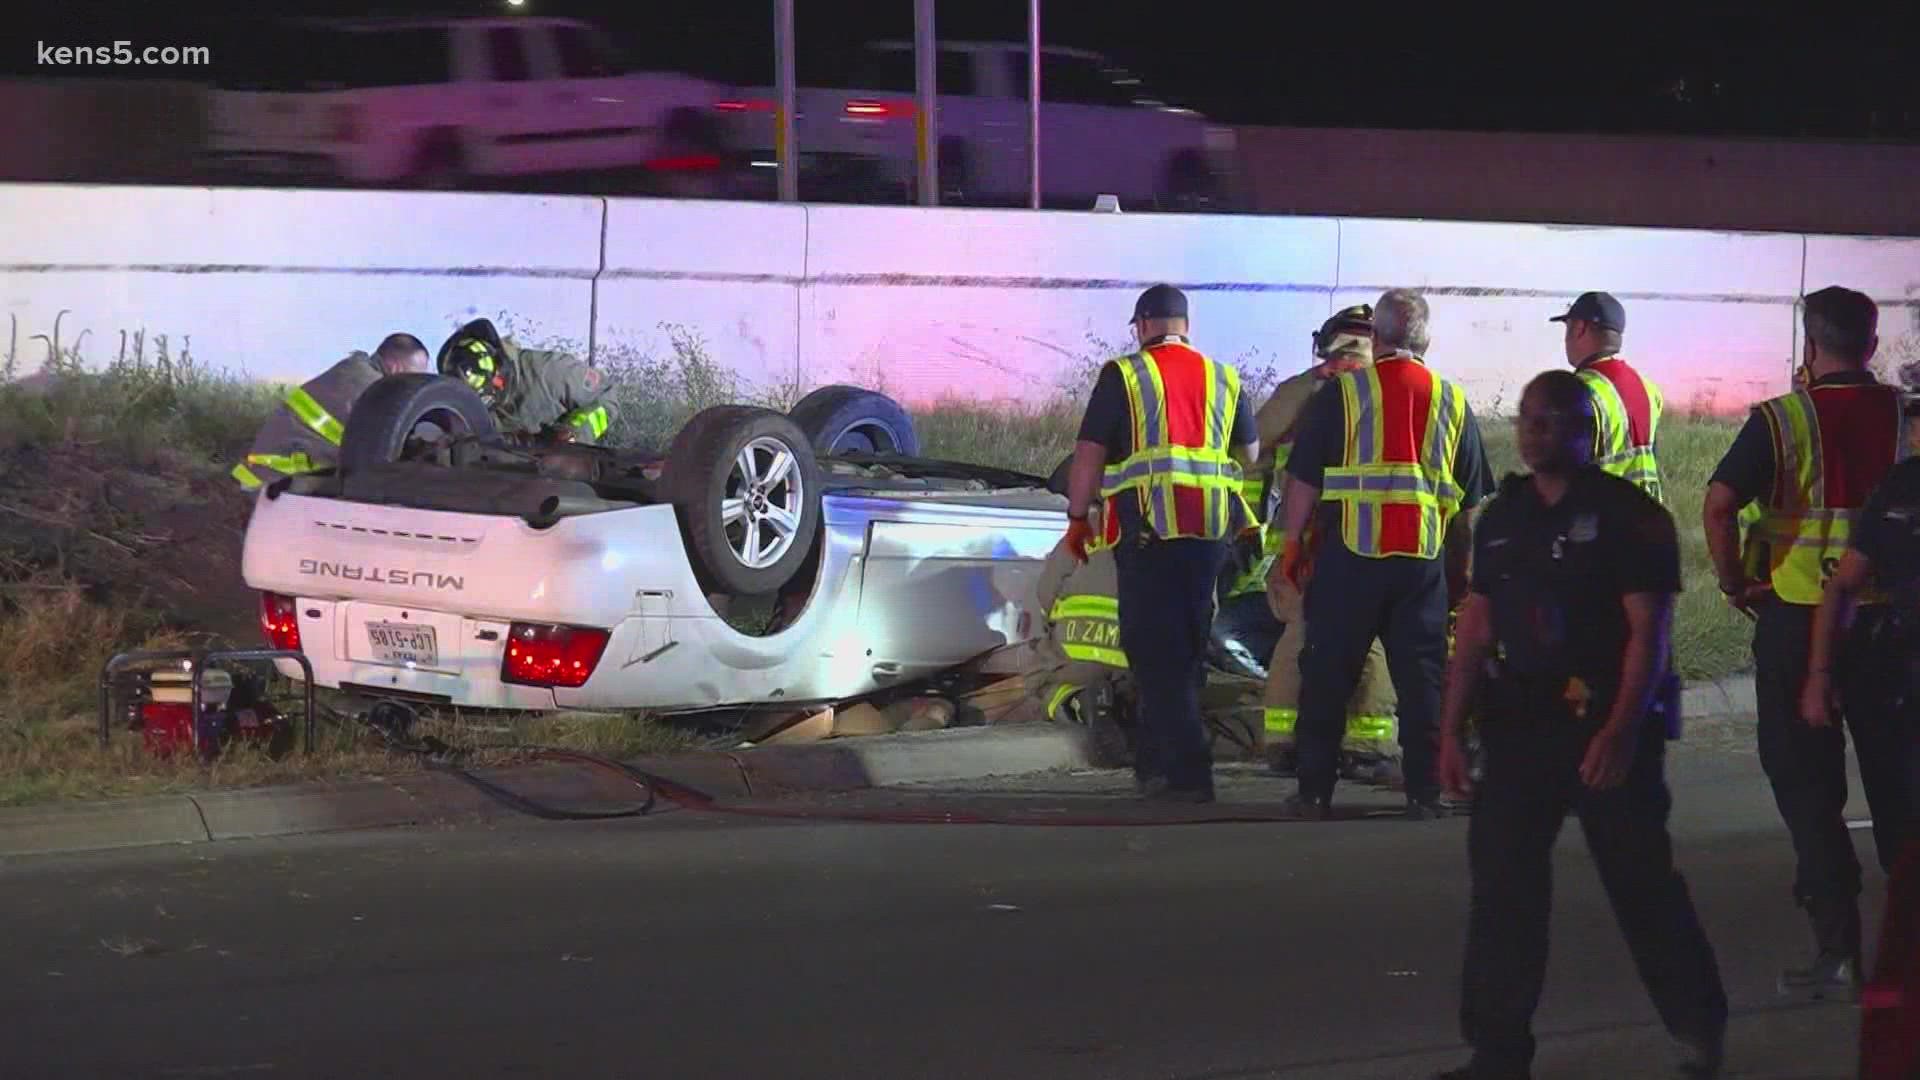 According to an SAPD sergeant, a woman was driving down too fast down the service road when she lost control of her Mustang and flipped over.